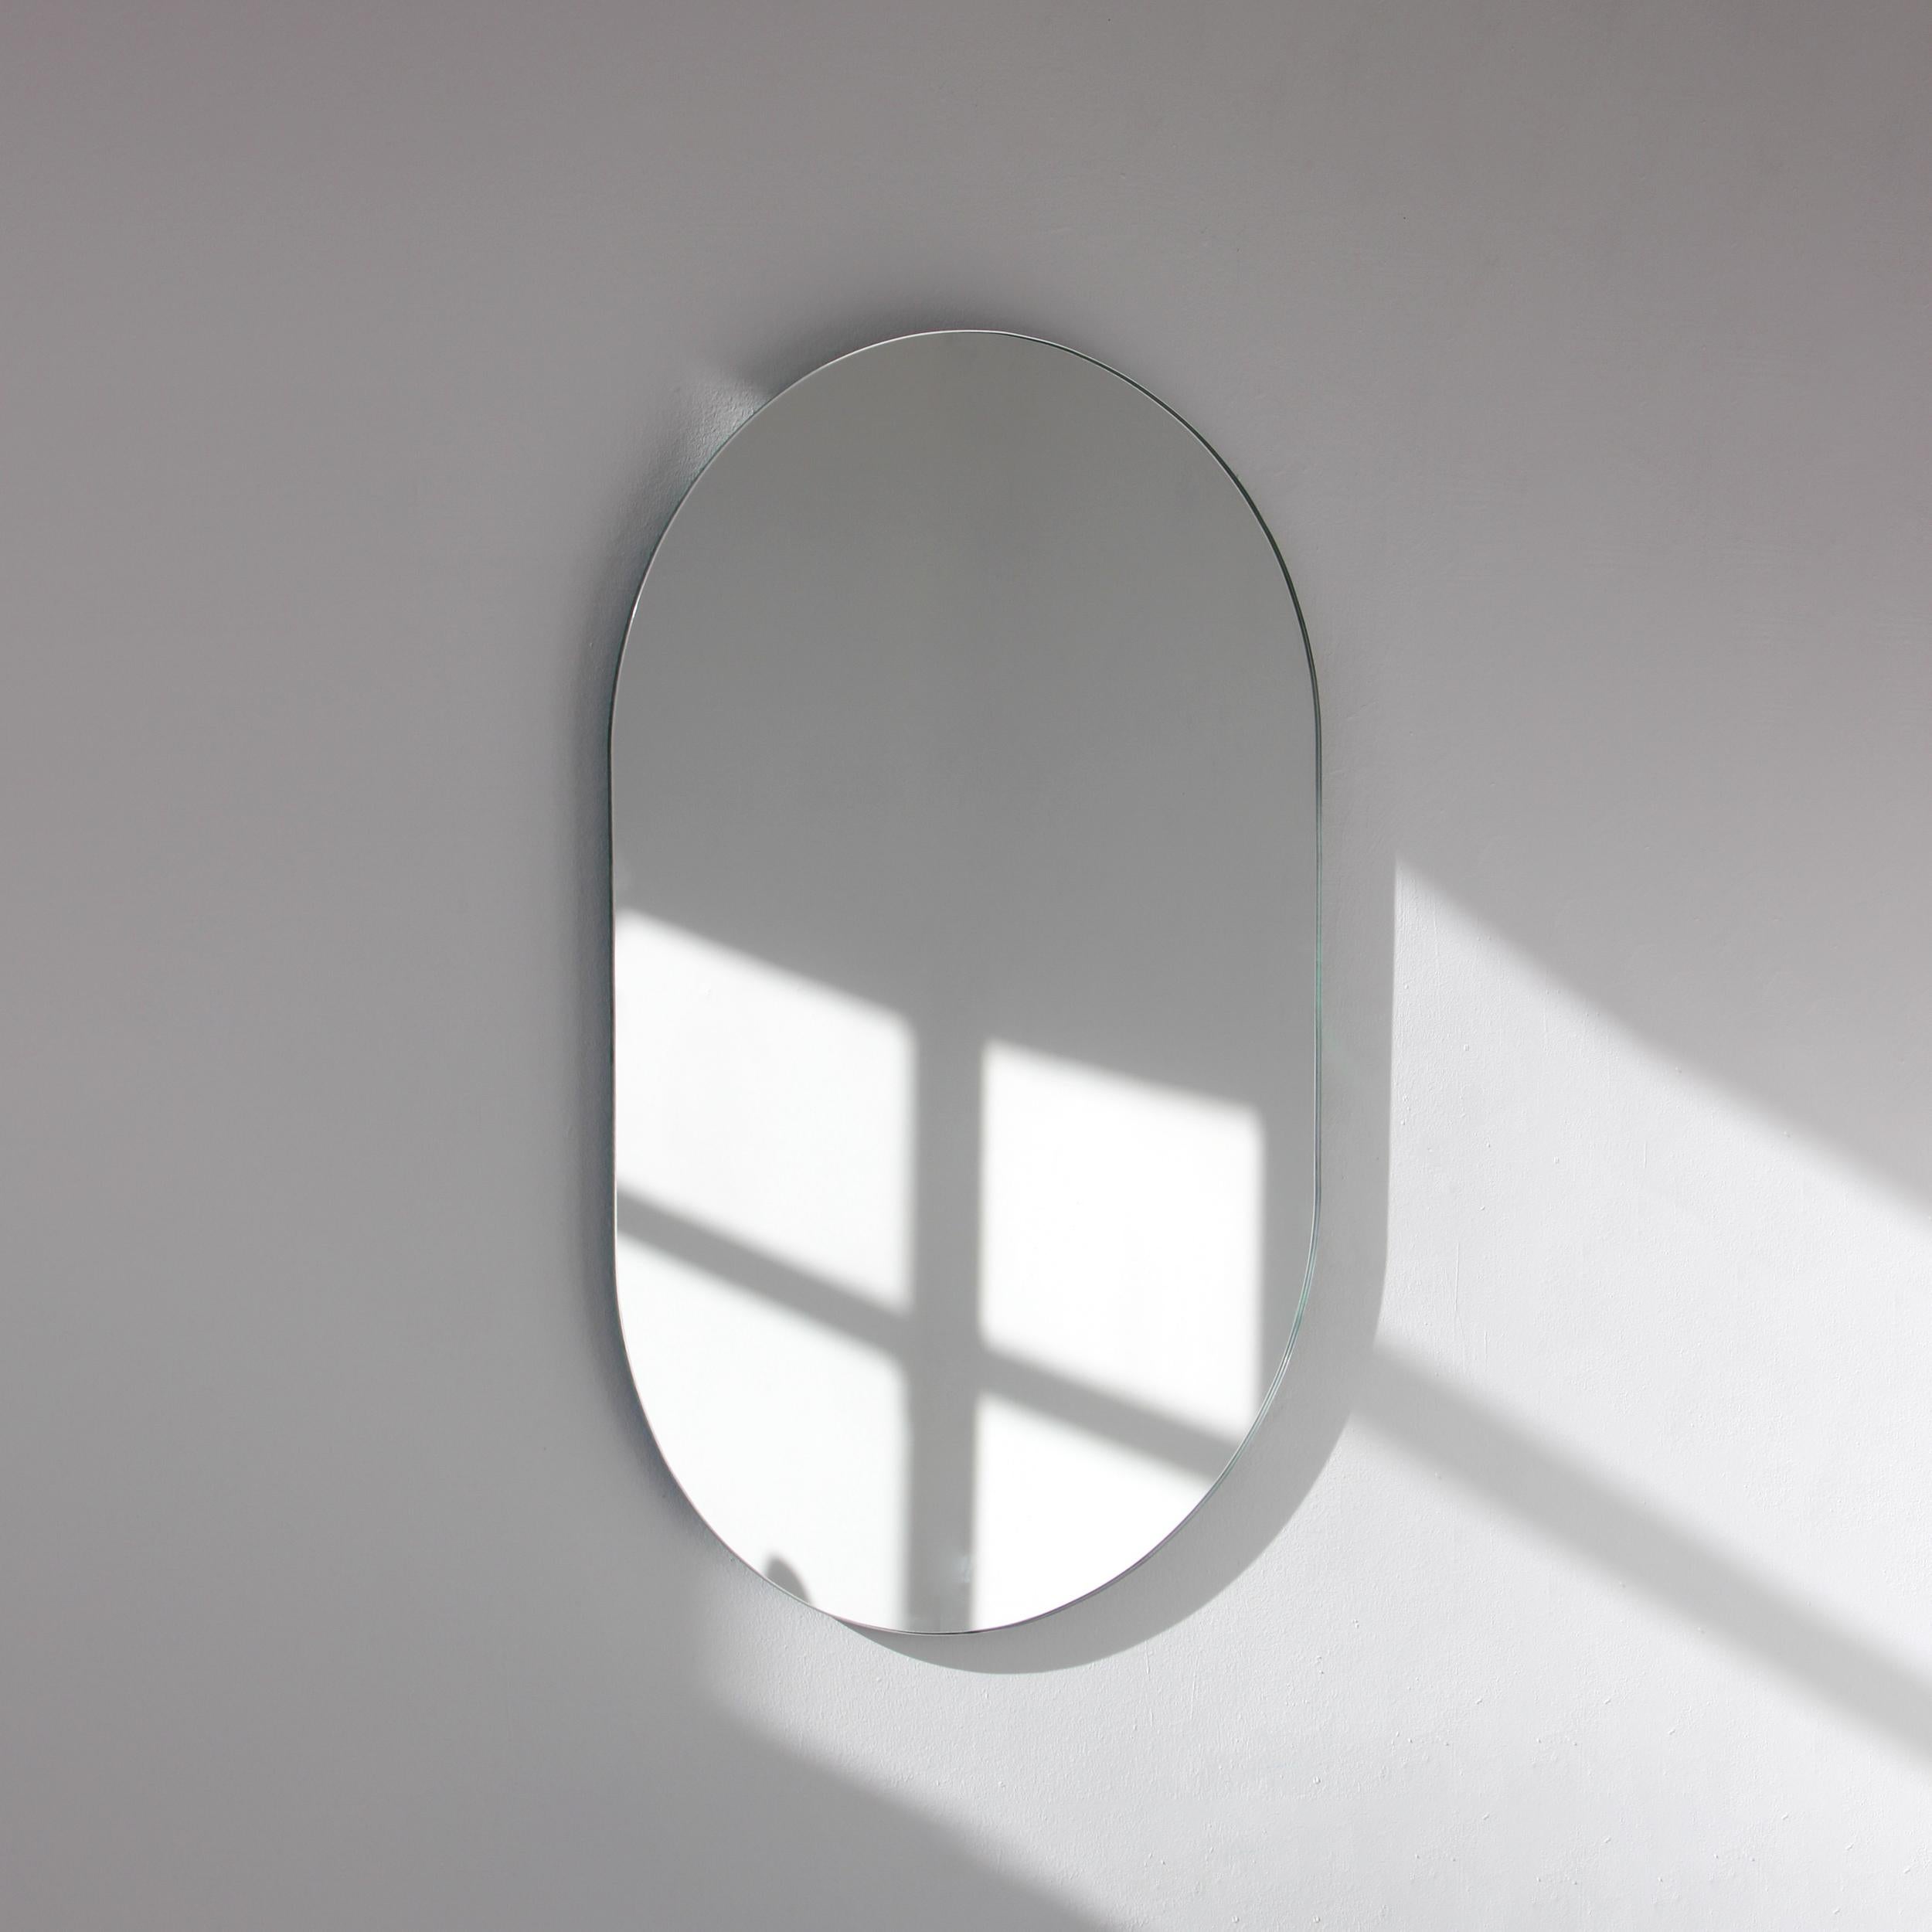 Minimalist capsule shaped frameless mirror. Quality design that ensures the mirror sits perfectly parallel to the wall. Designed and made in London, UK.

Fitted with professional plates not visible once installed for an easy and safe installation.